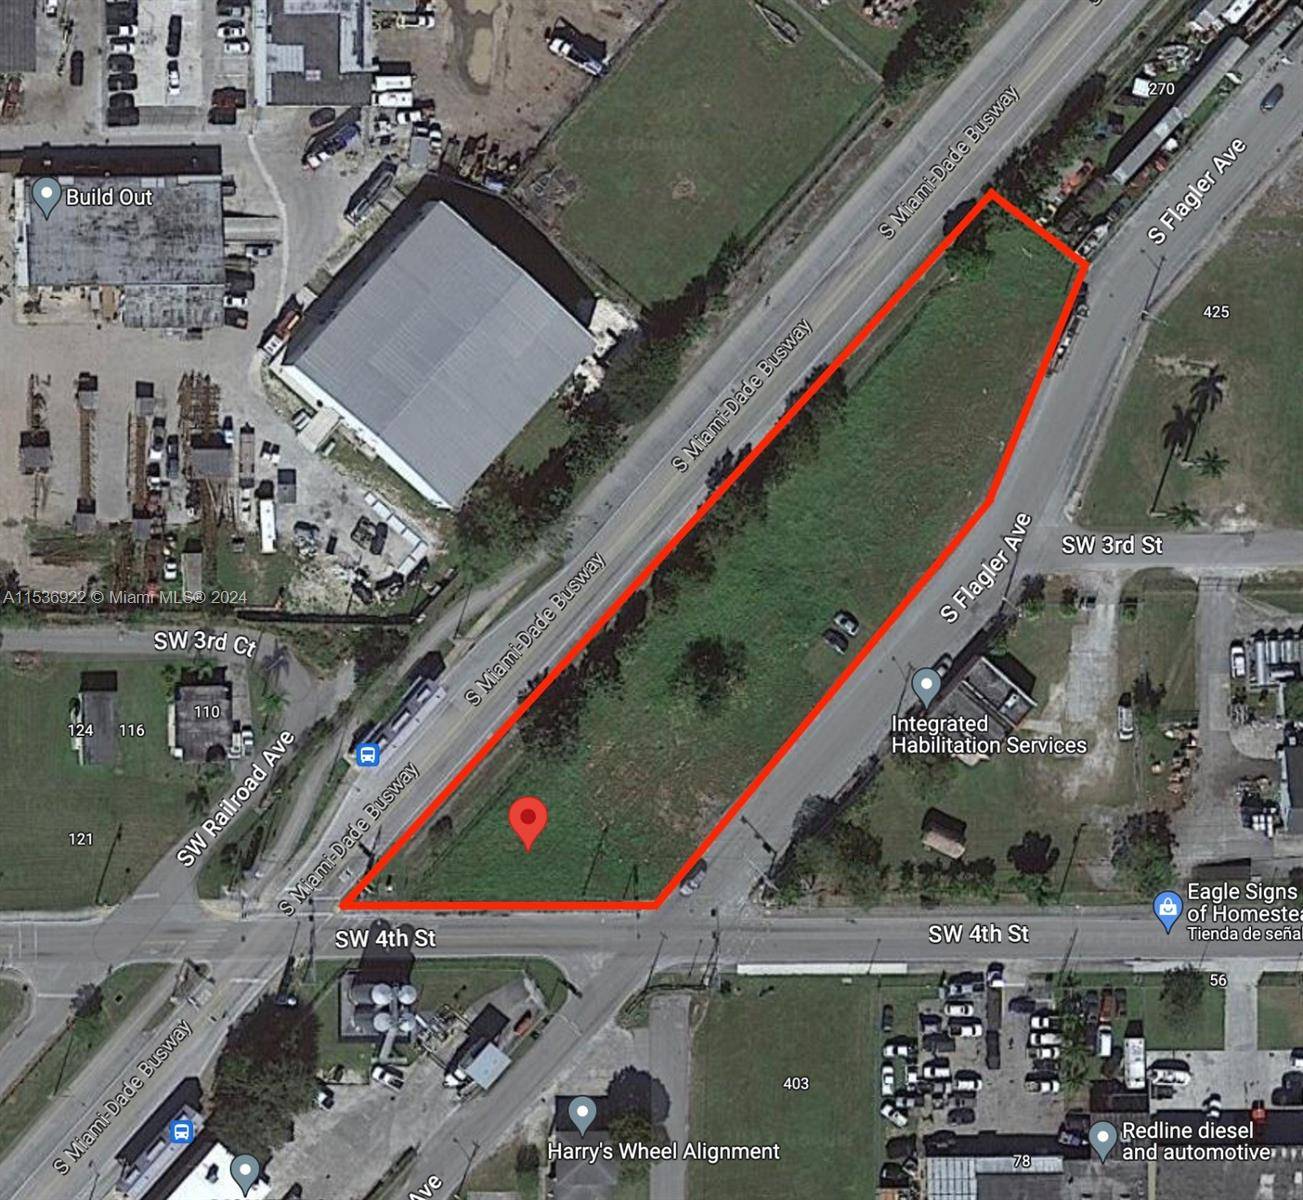 This is a 1. 01 acre lot zoned for INDUSTRIAL use and is available for sale.